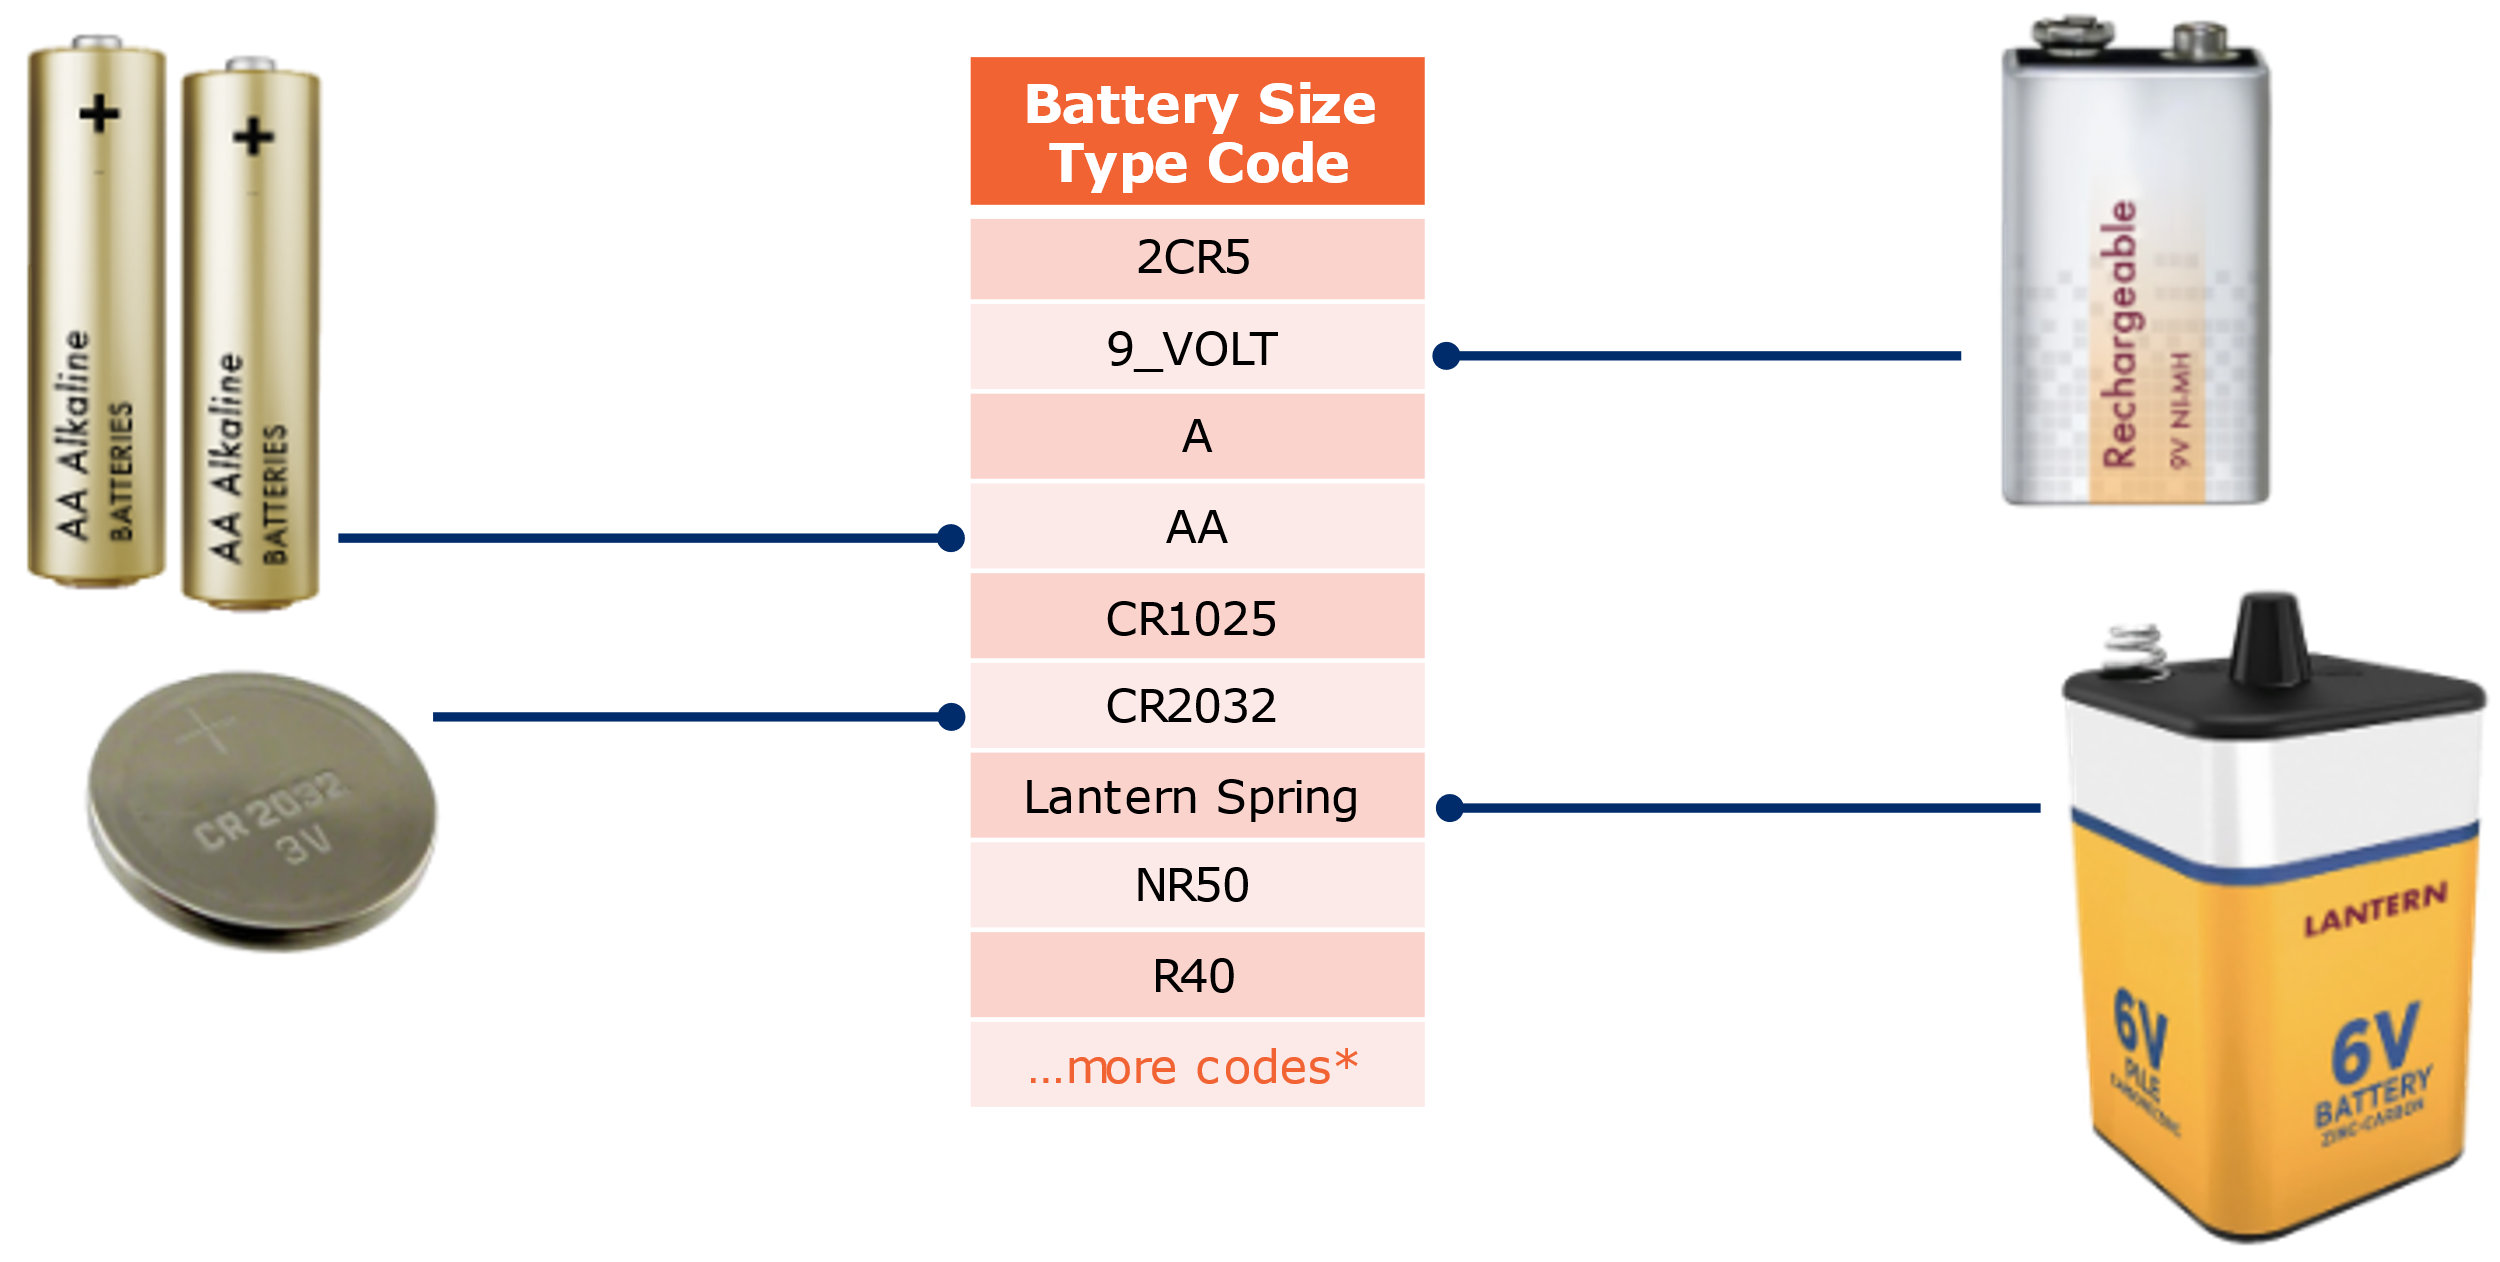 7.1 Battery Size Type Code Examples - Image 0